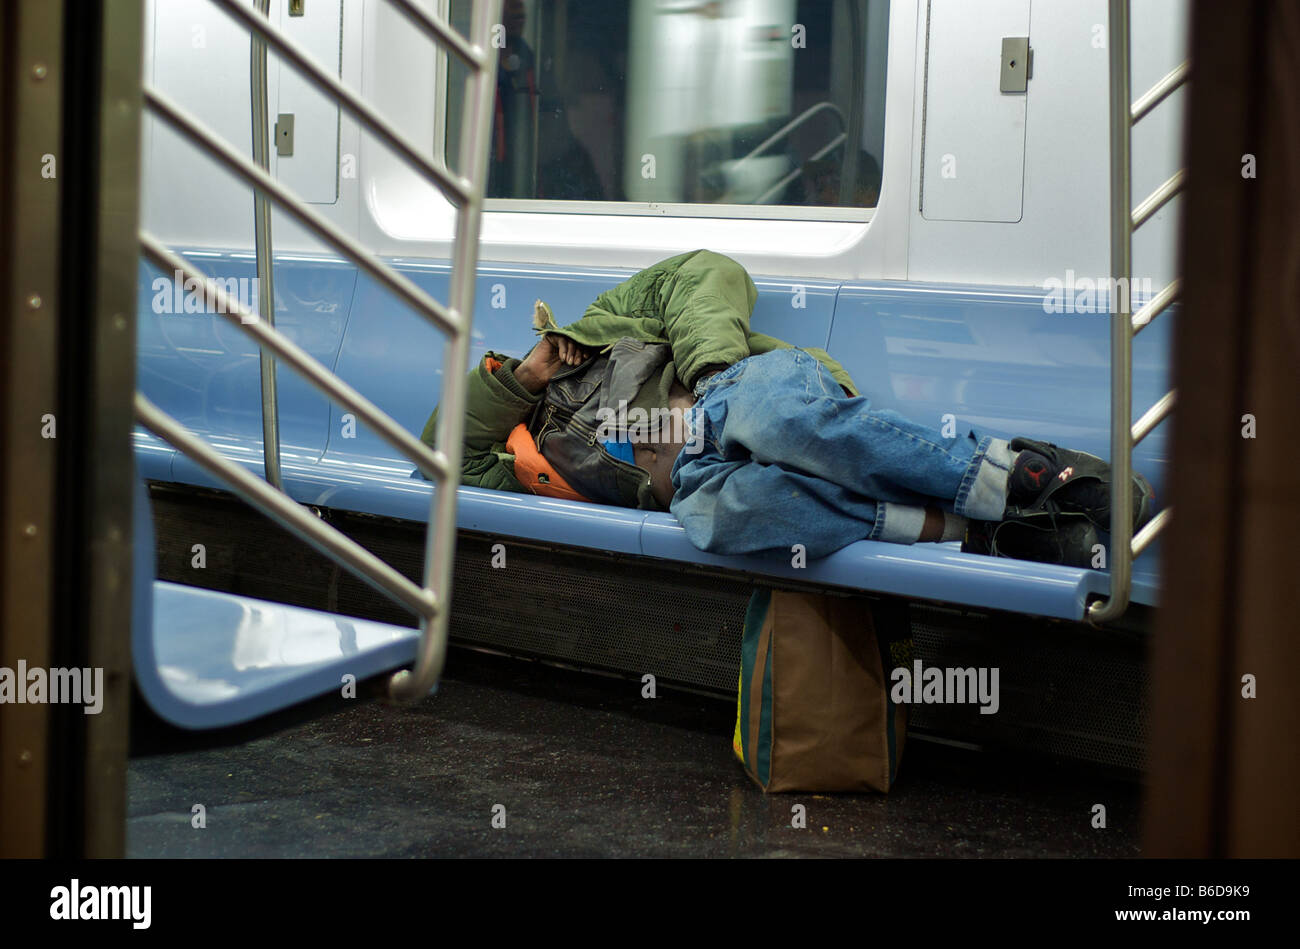 Homeless Man Sleeps in NYC Subway (For Editorial Use Only) Stock Photo